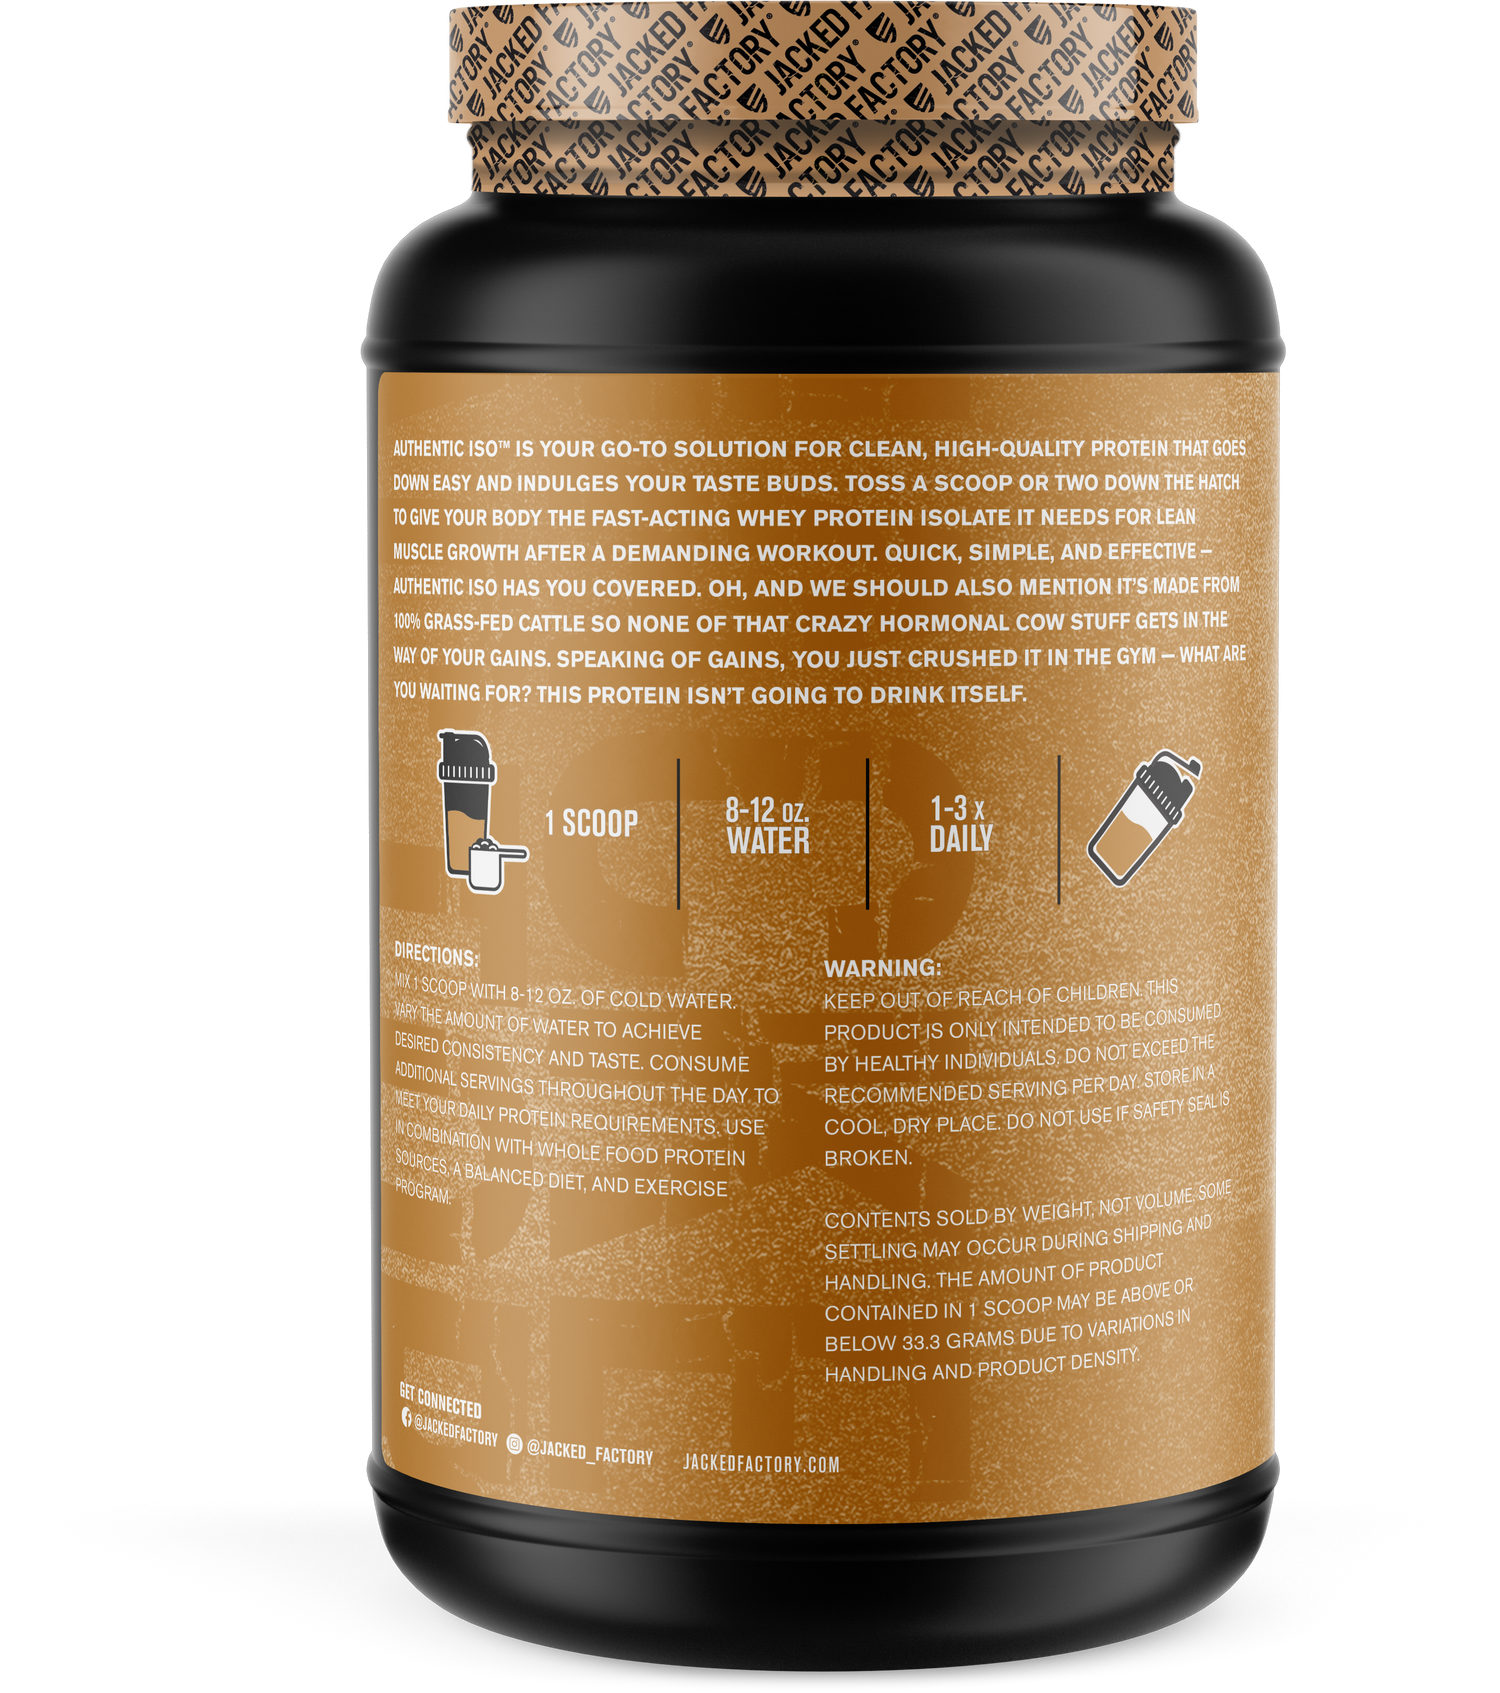 Jacked Factory's 30 servings Chocolate Peanut Butter Authentic ISO protein in a black bottle with brown label showing product description